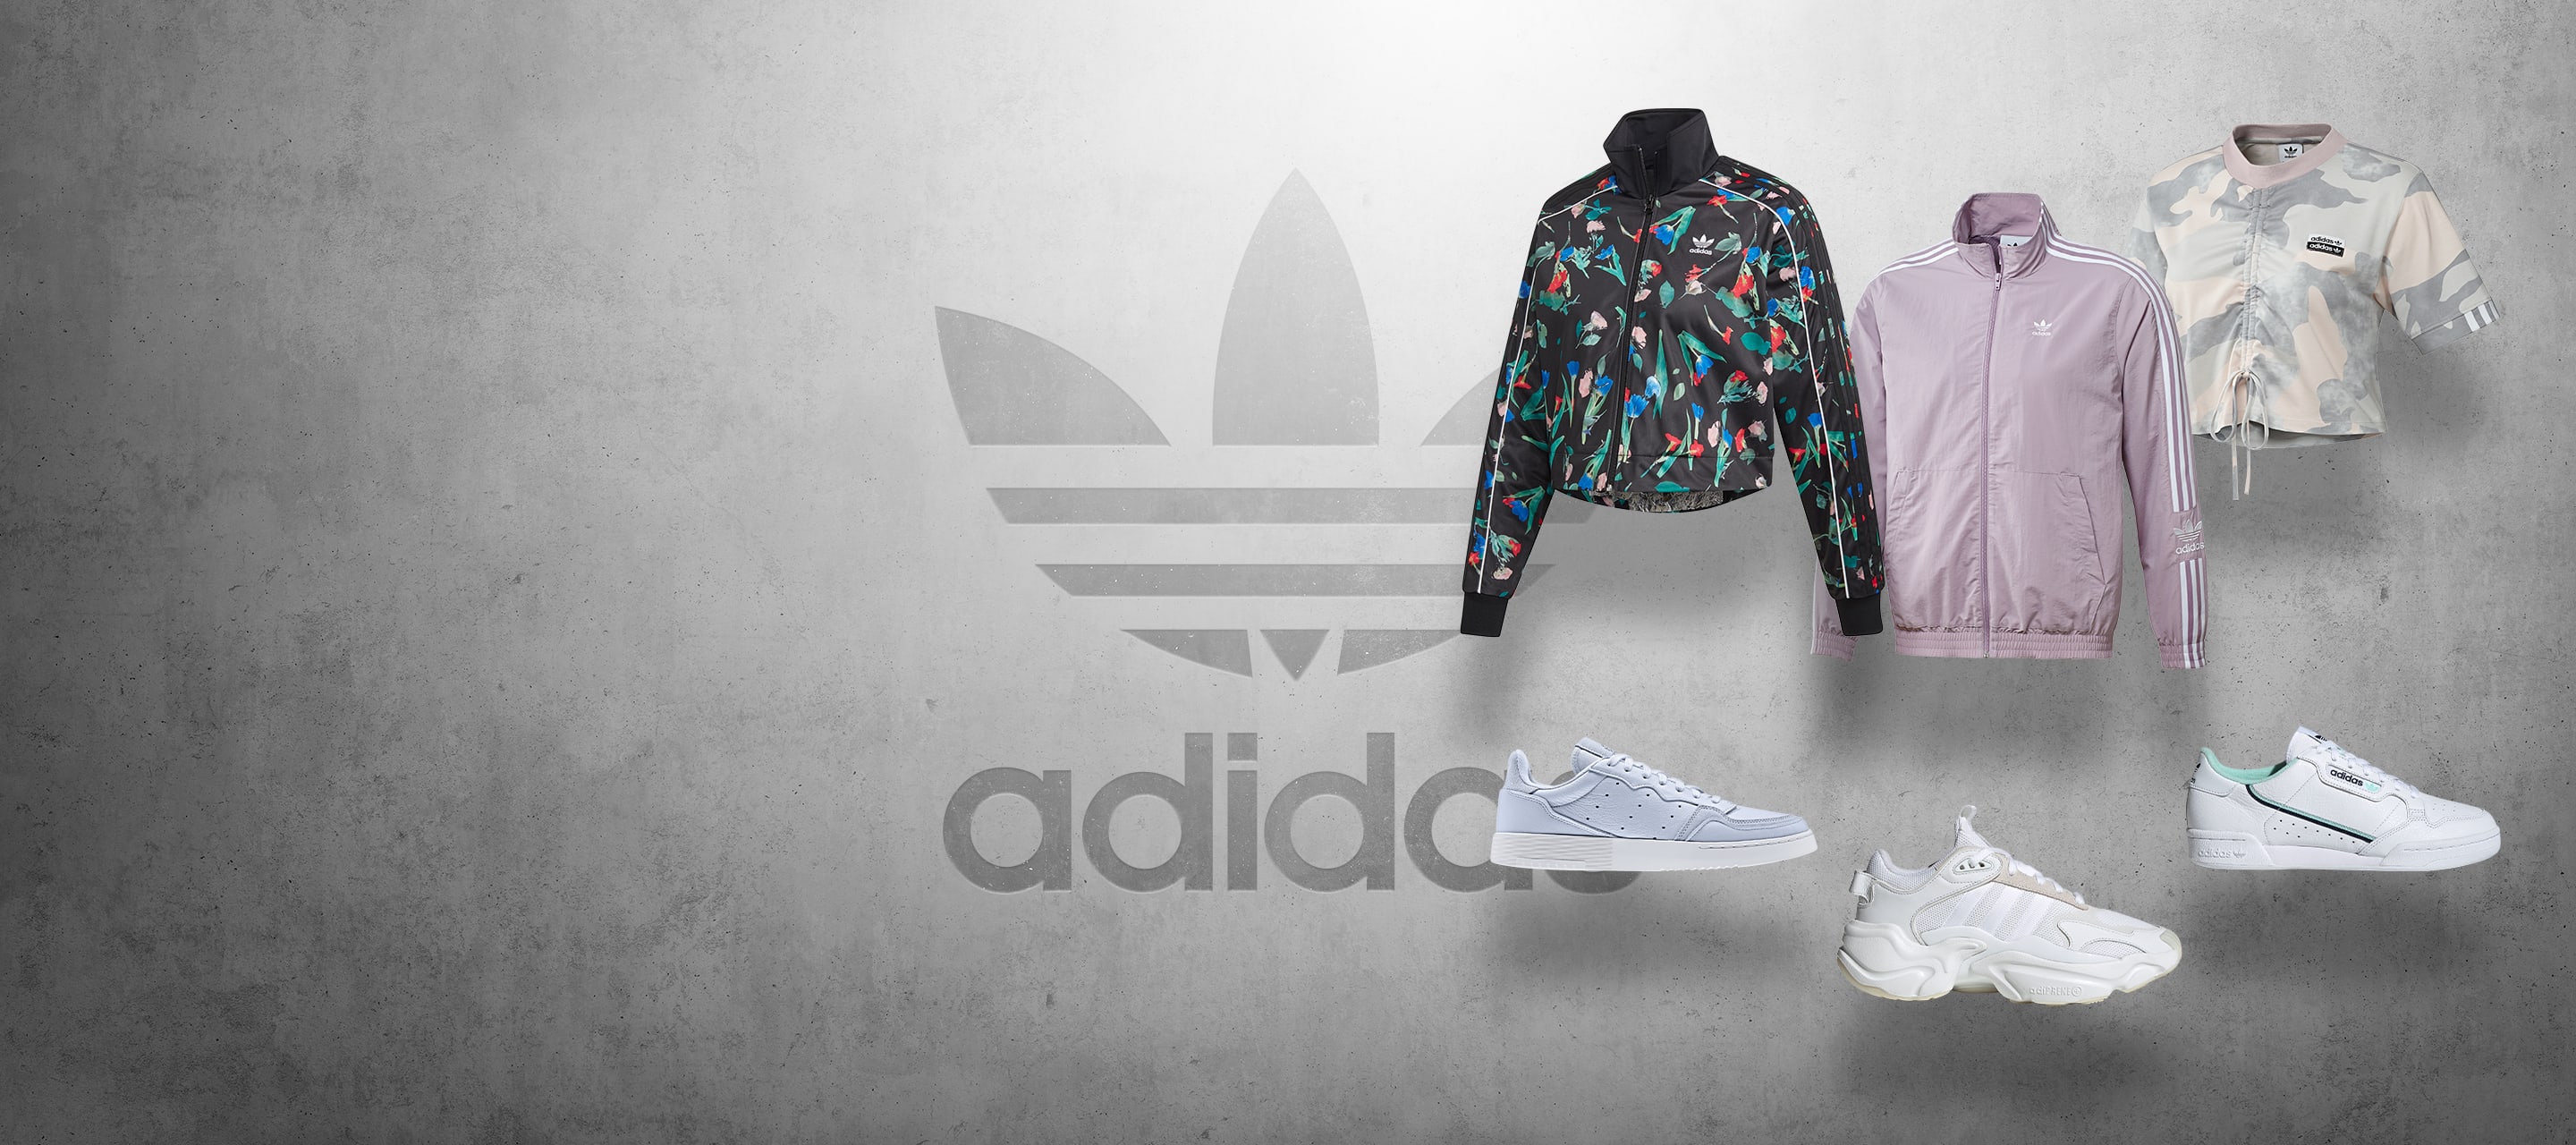 Promos | adidas outlet France